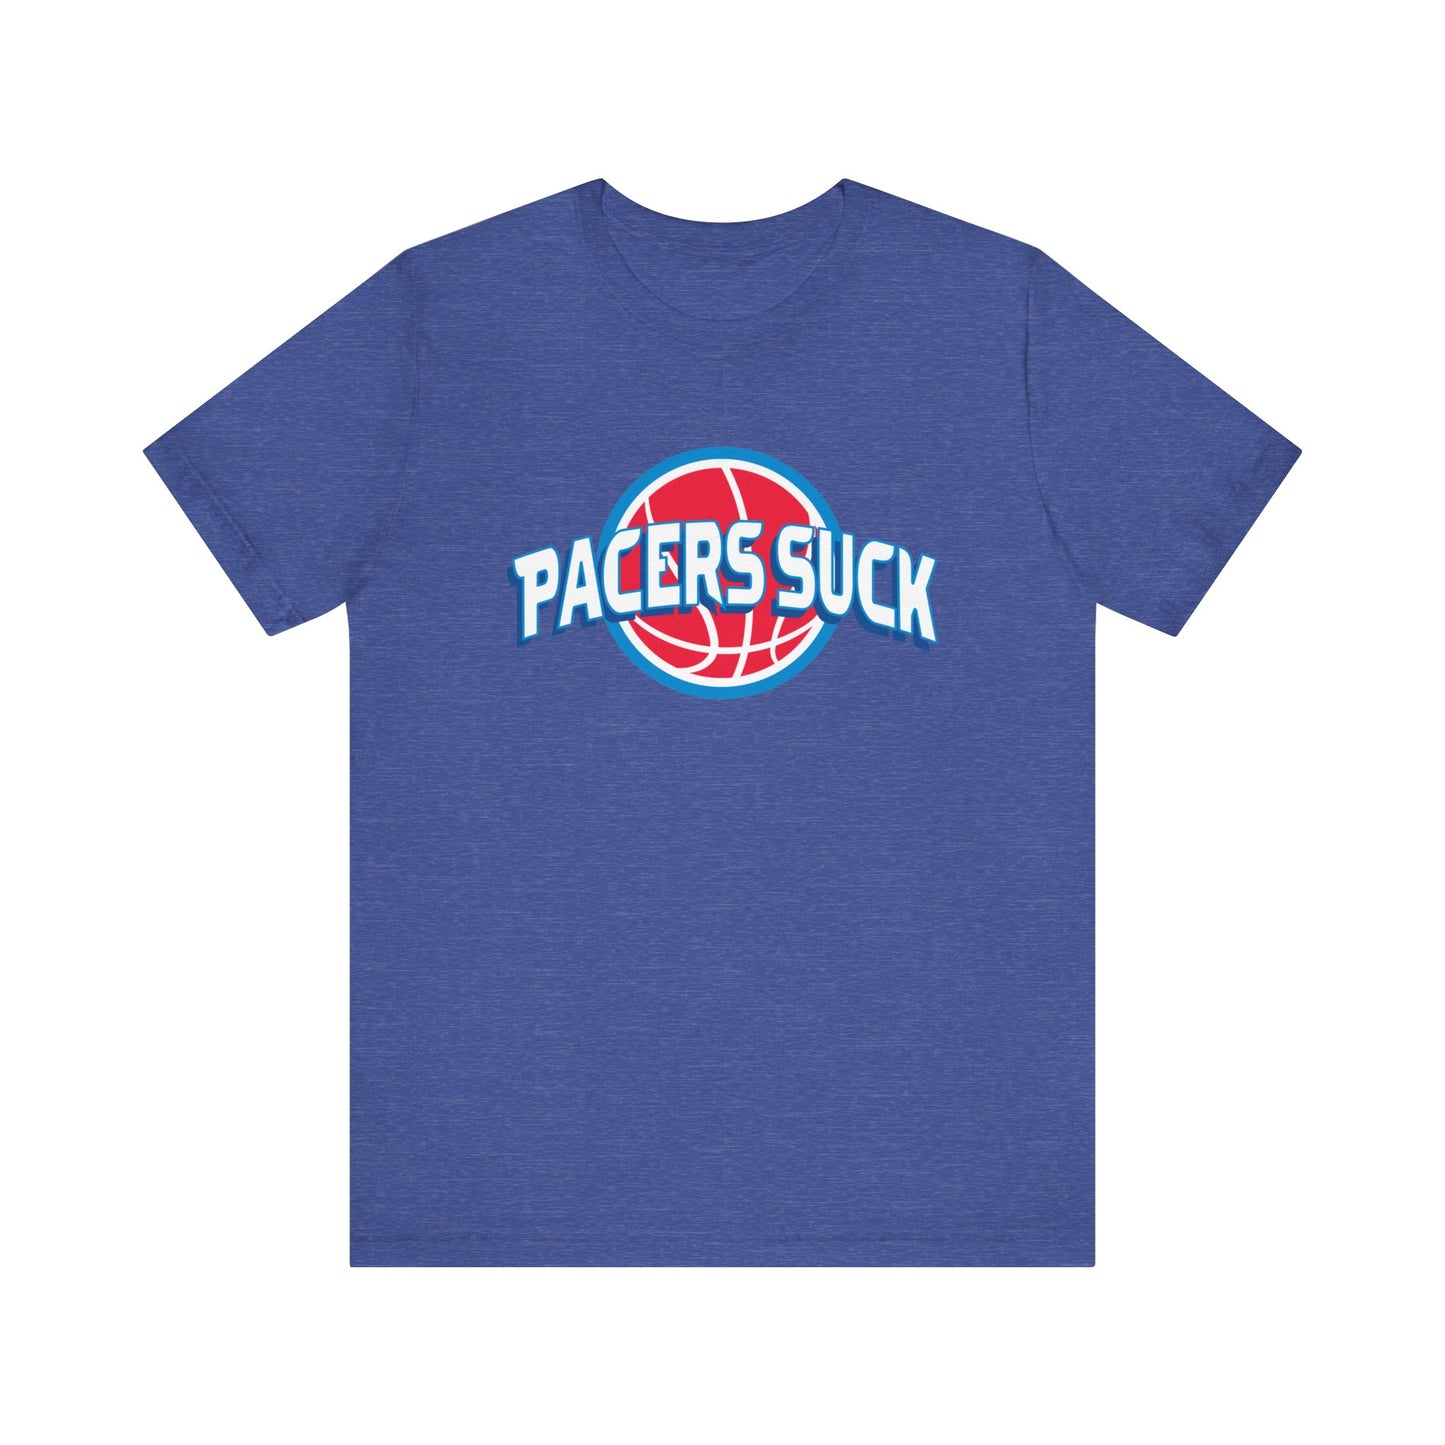 Paysers Suck (for Detroit fans) - Unisex Jersey Short Sleeve Tee